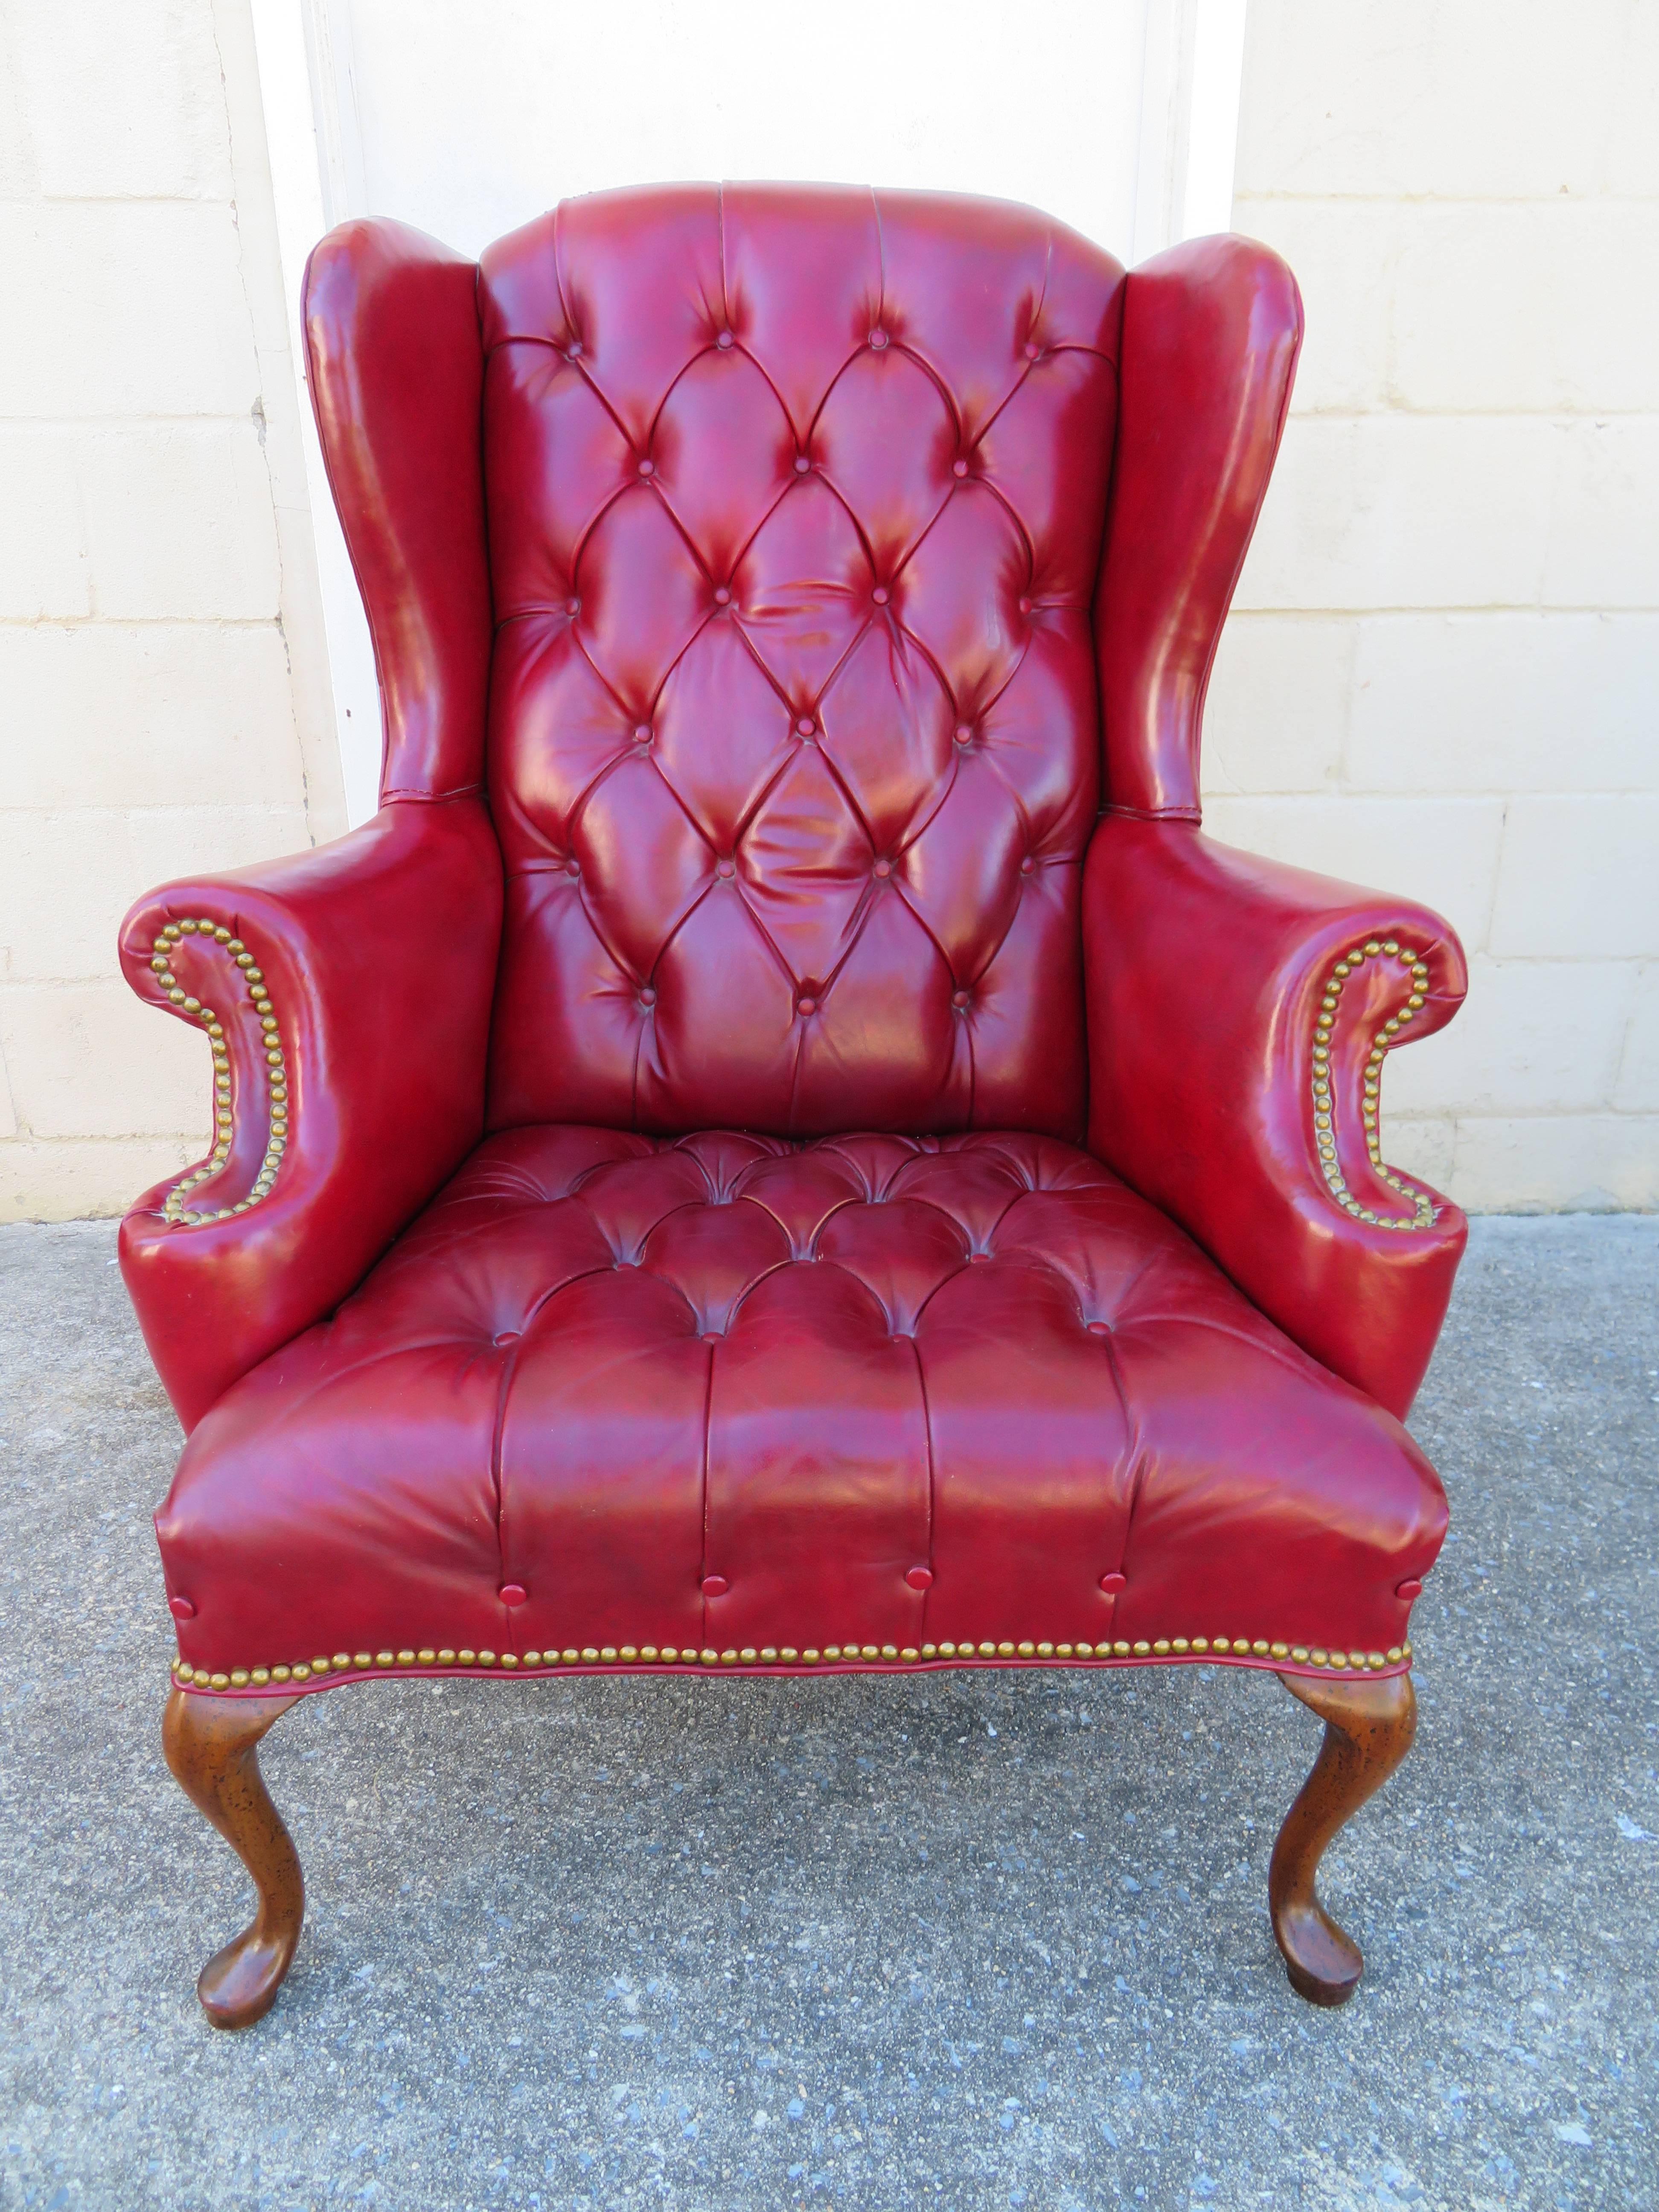 Handsome red leather tufted Chesterfield wingback chair with matching ottoman. This stunning set has great vintage appeal with slightly worn red leather and brass studded arms. The chair measures 44